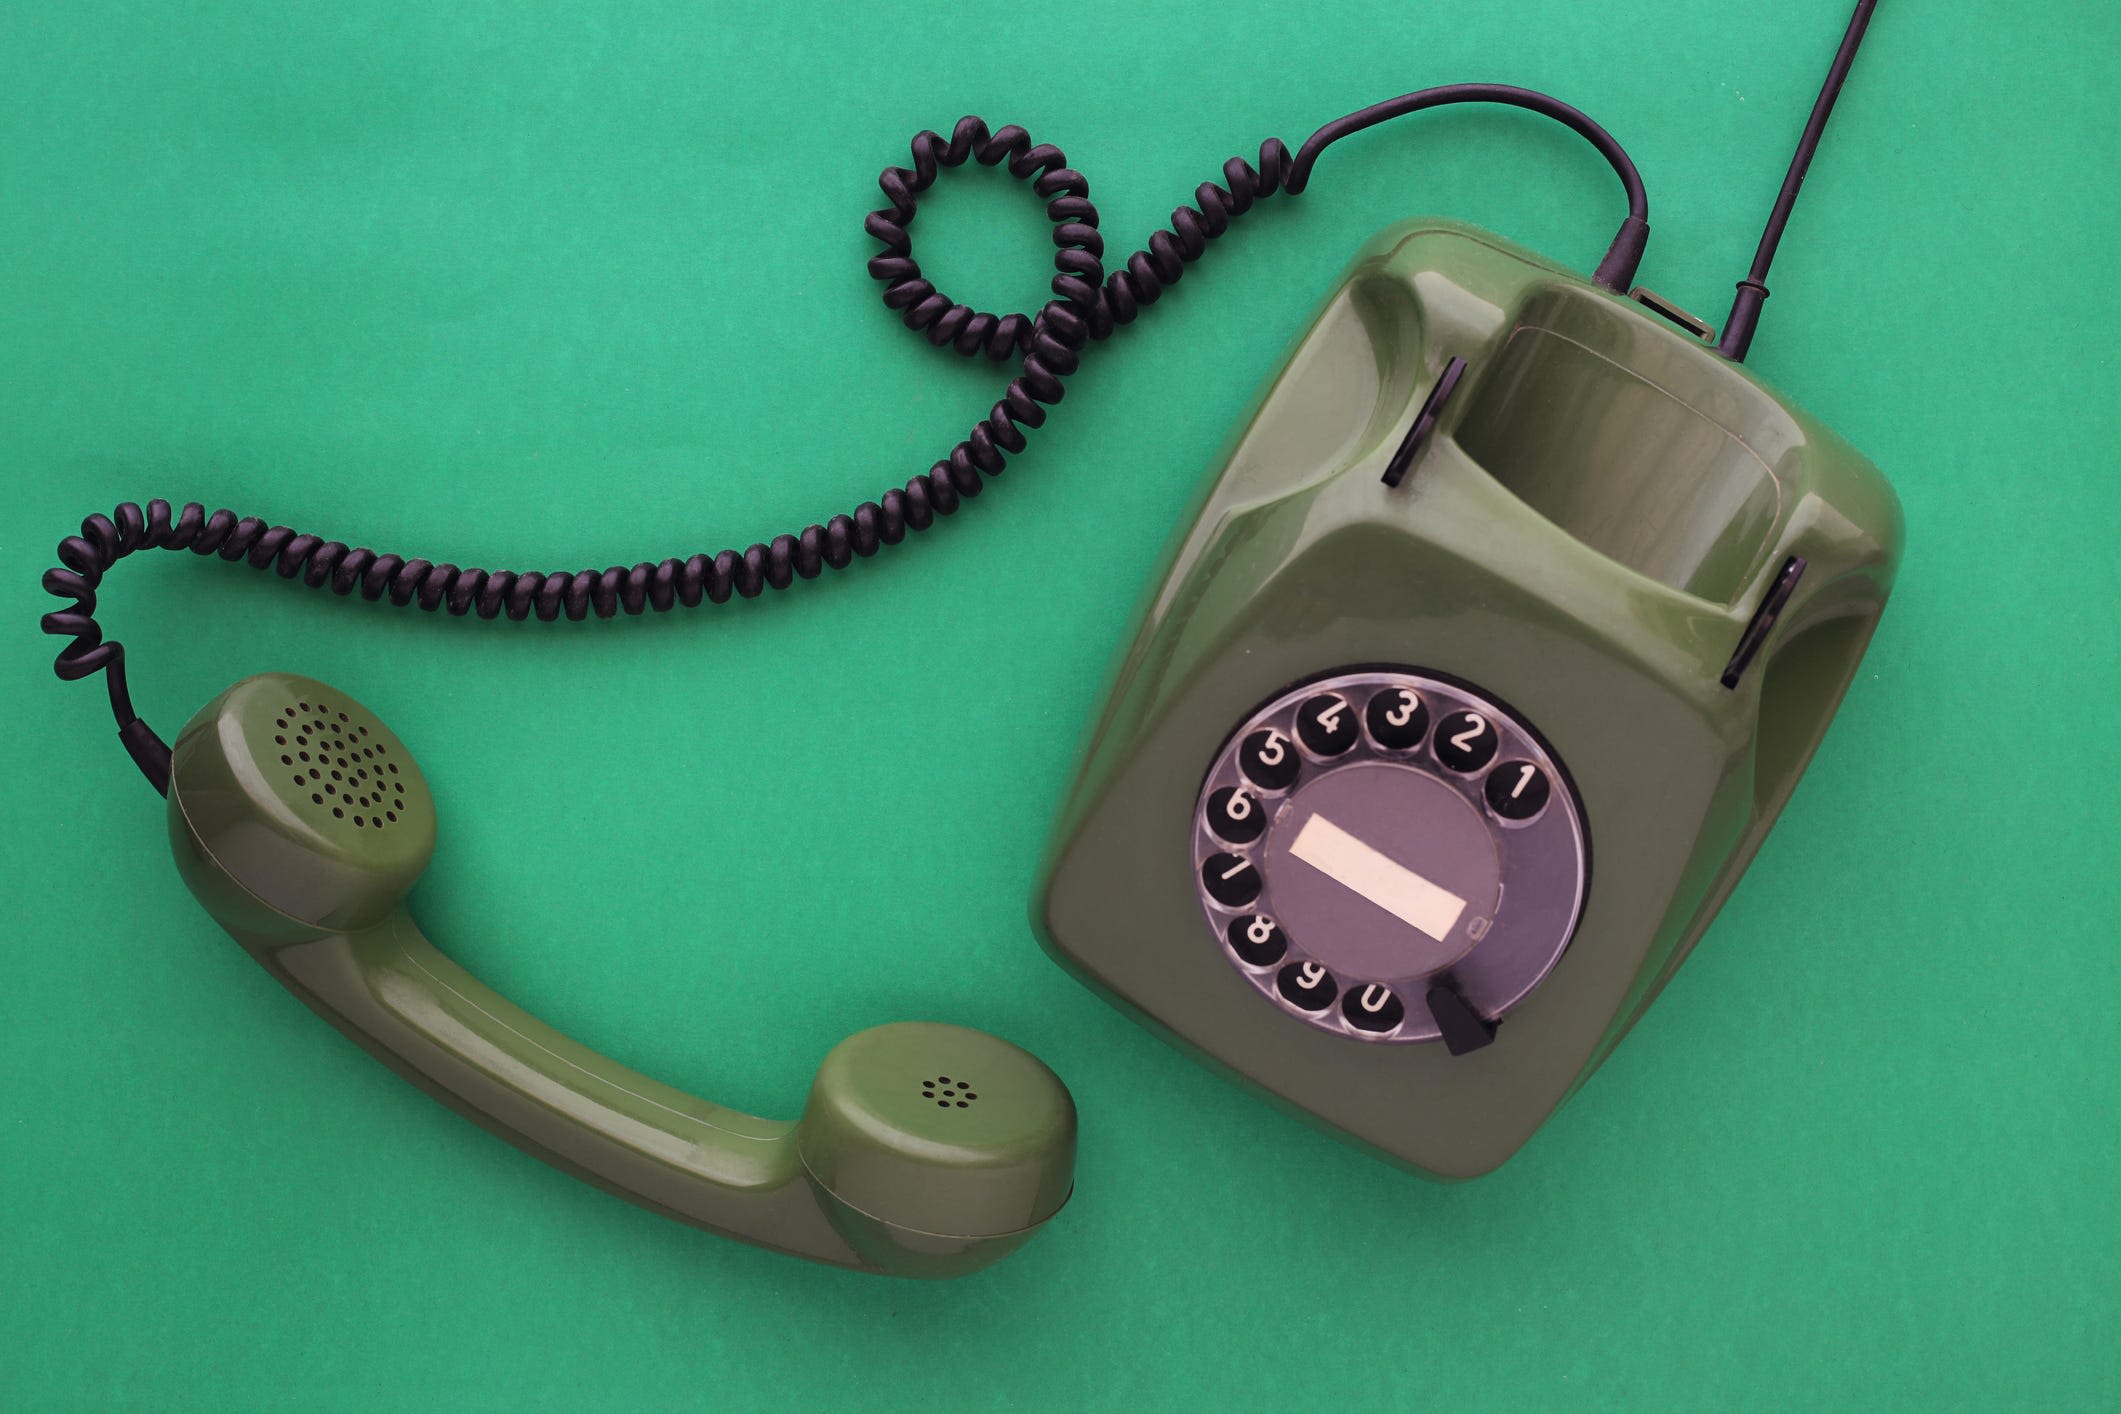 Landlines may be saved in California - for now. What this means for consumers nationwide